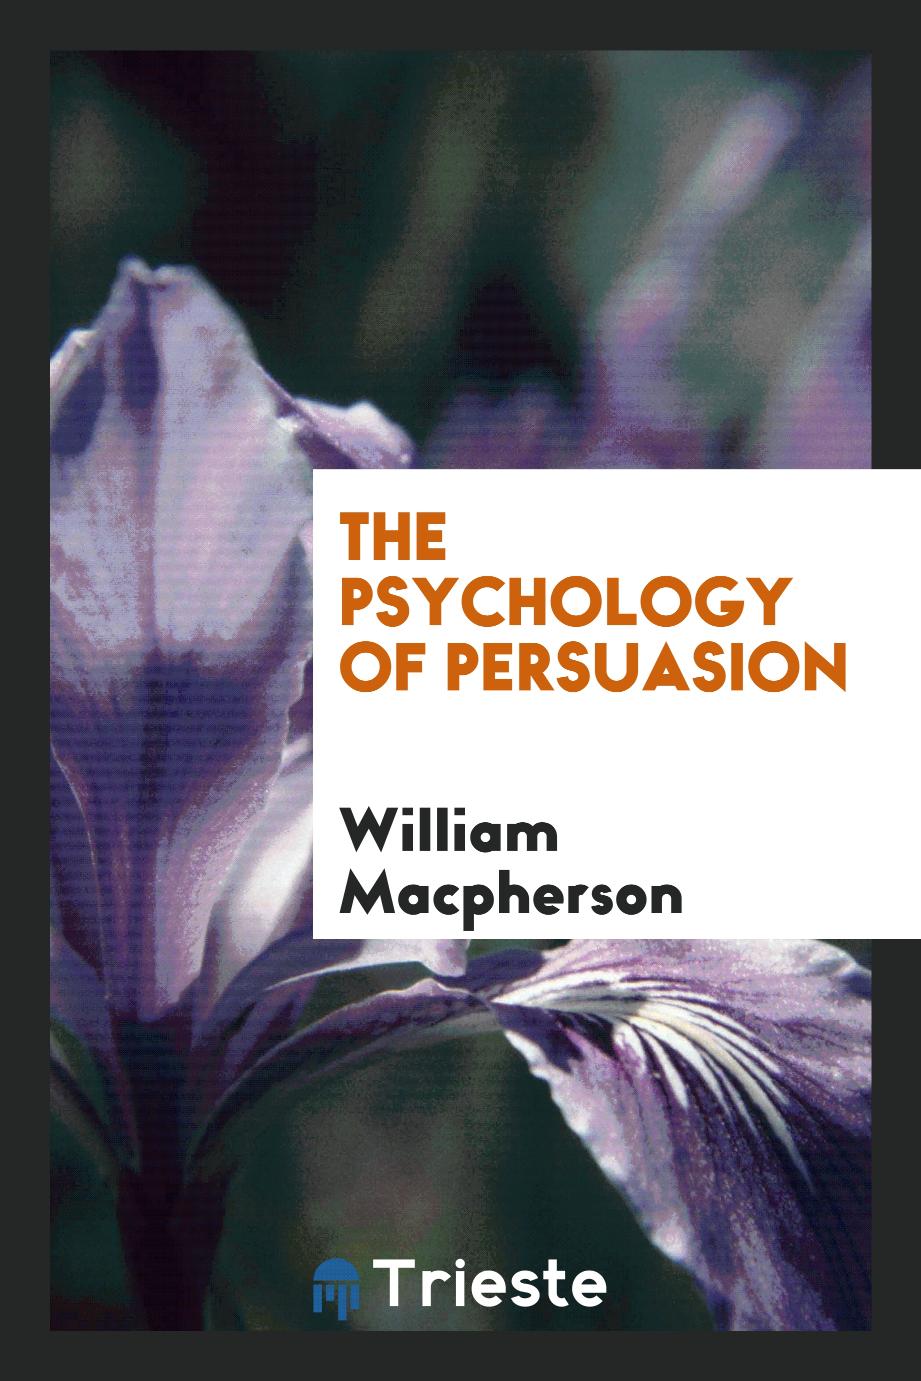 The psychology of persuasion